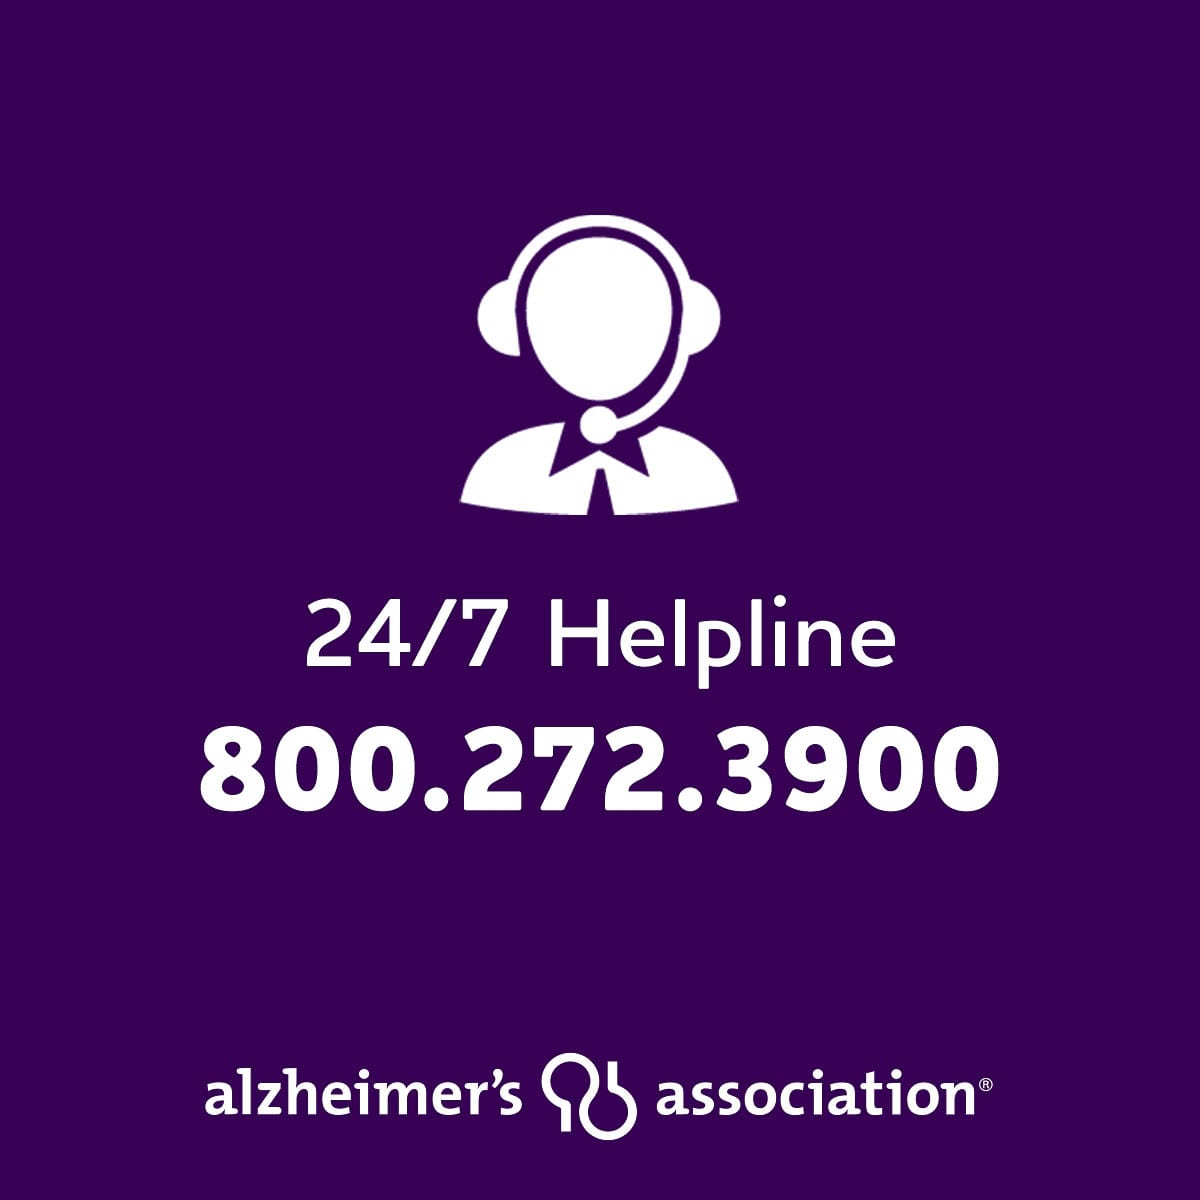 Graphic courtesy of the Alzheimer’s Association